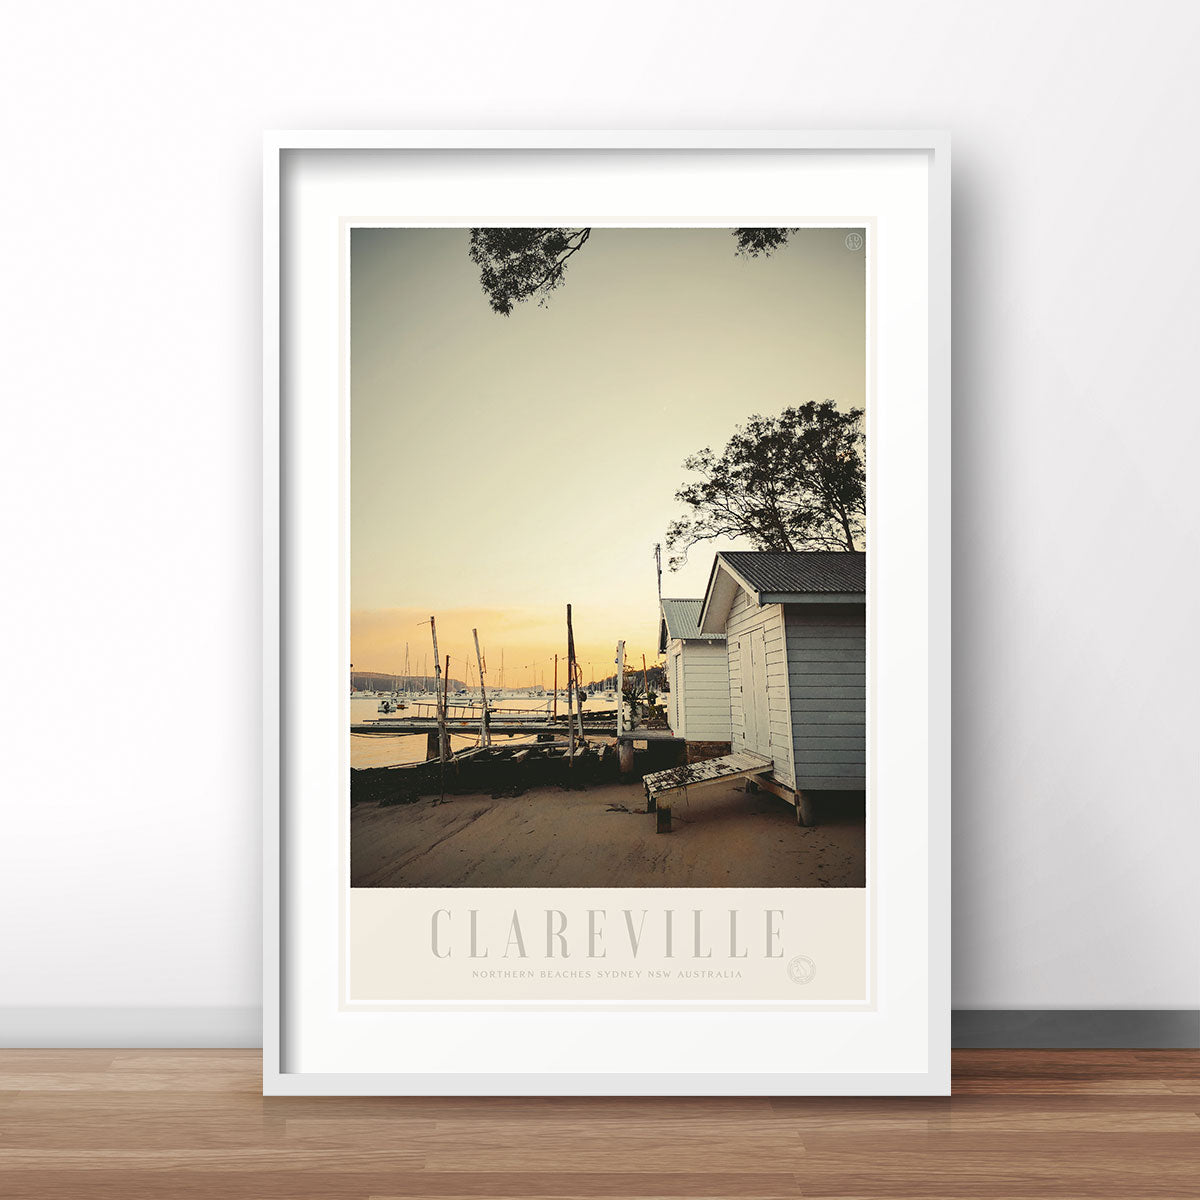 Clareville Pittwater Sydney, vintage retro poster print from Places We Luv